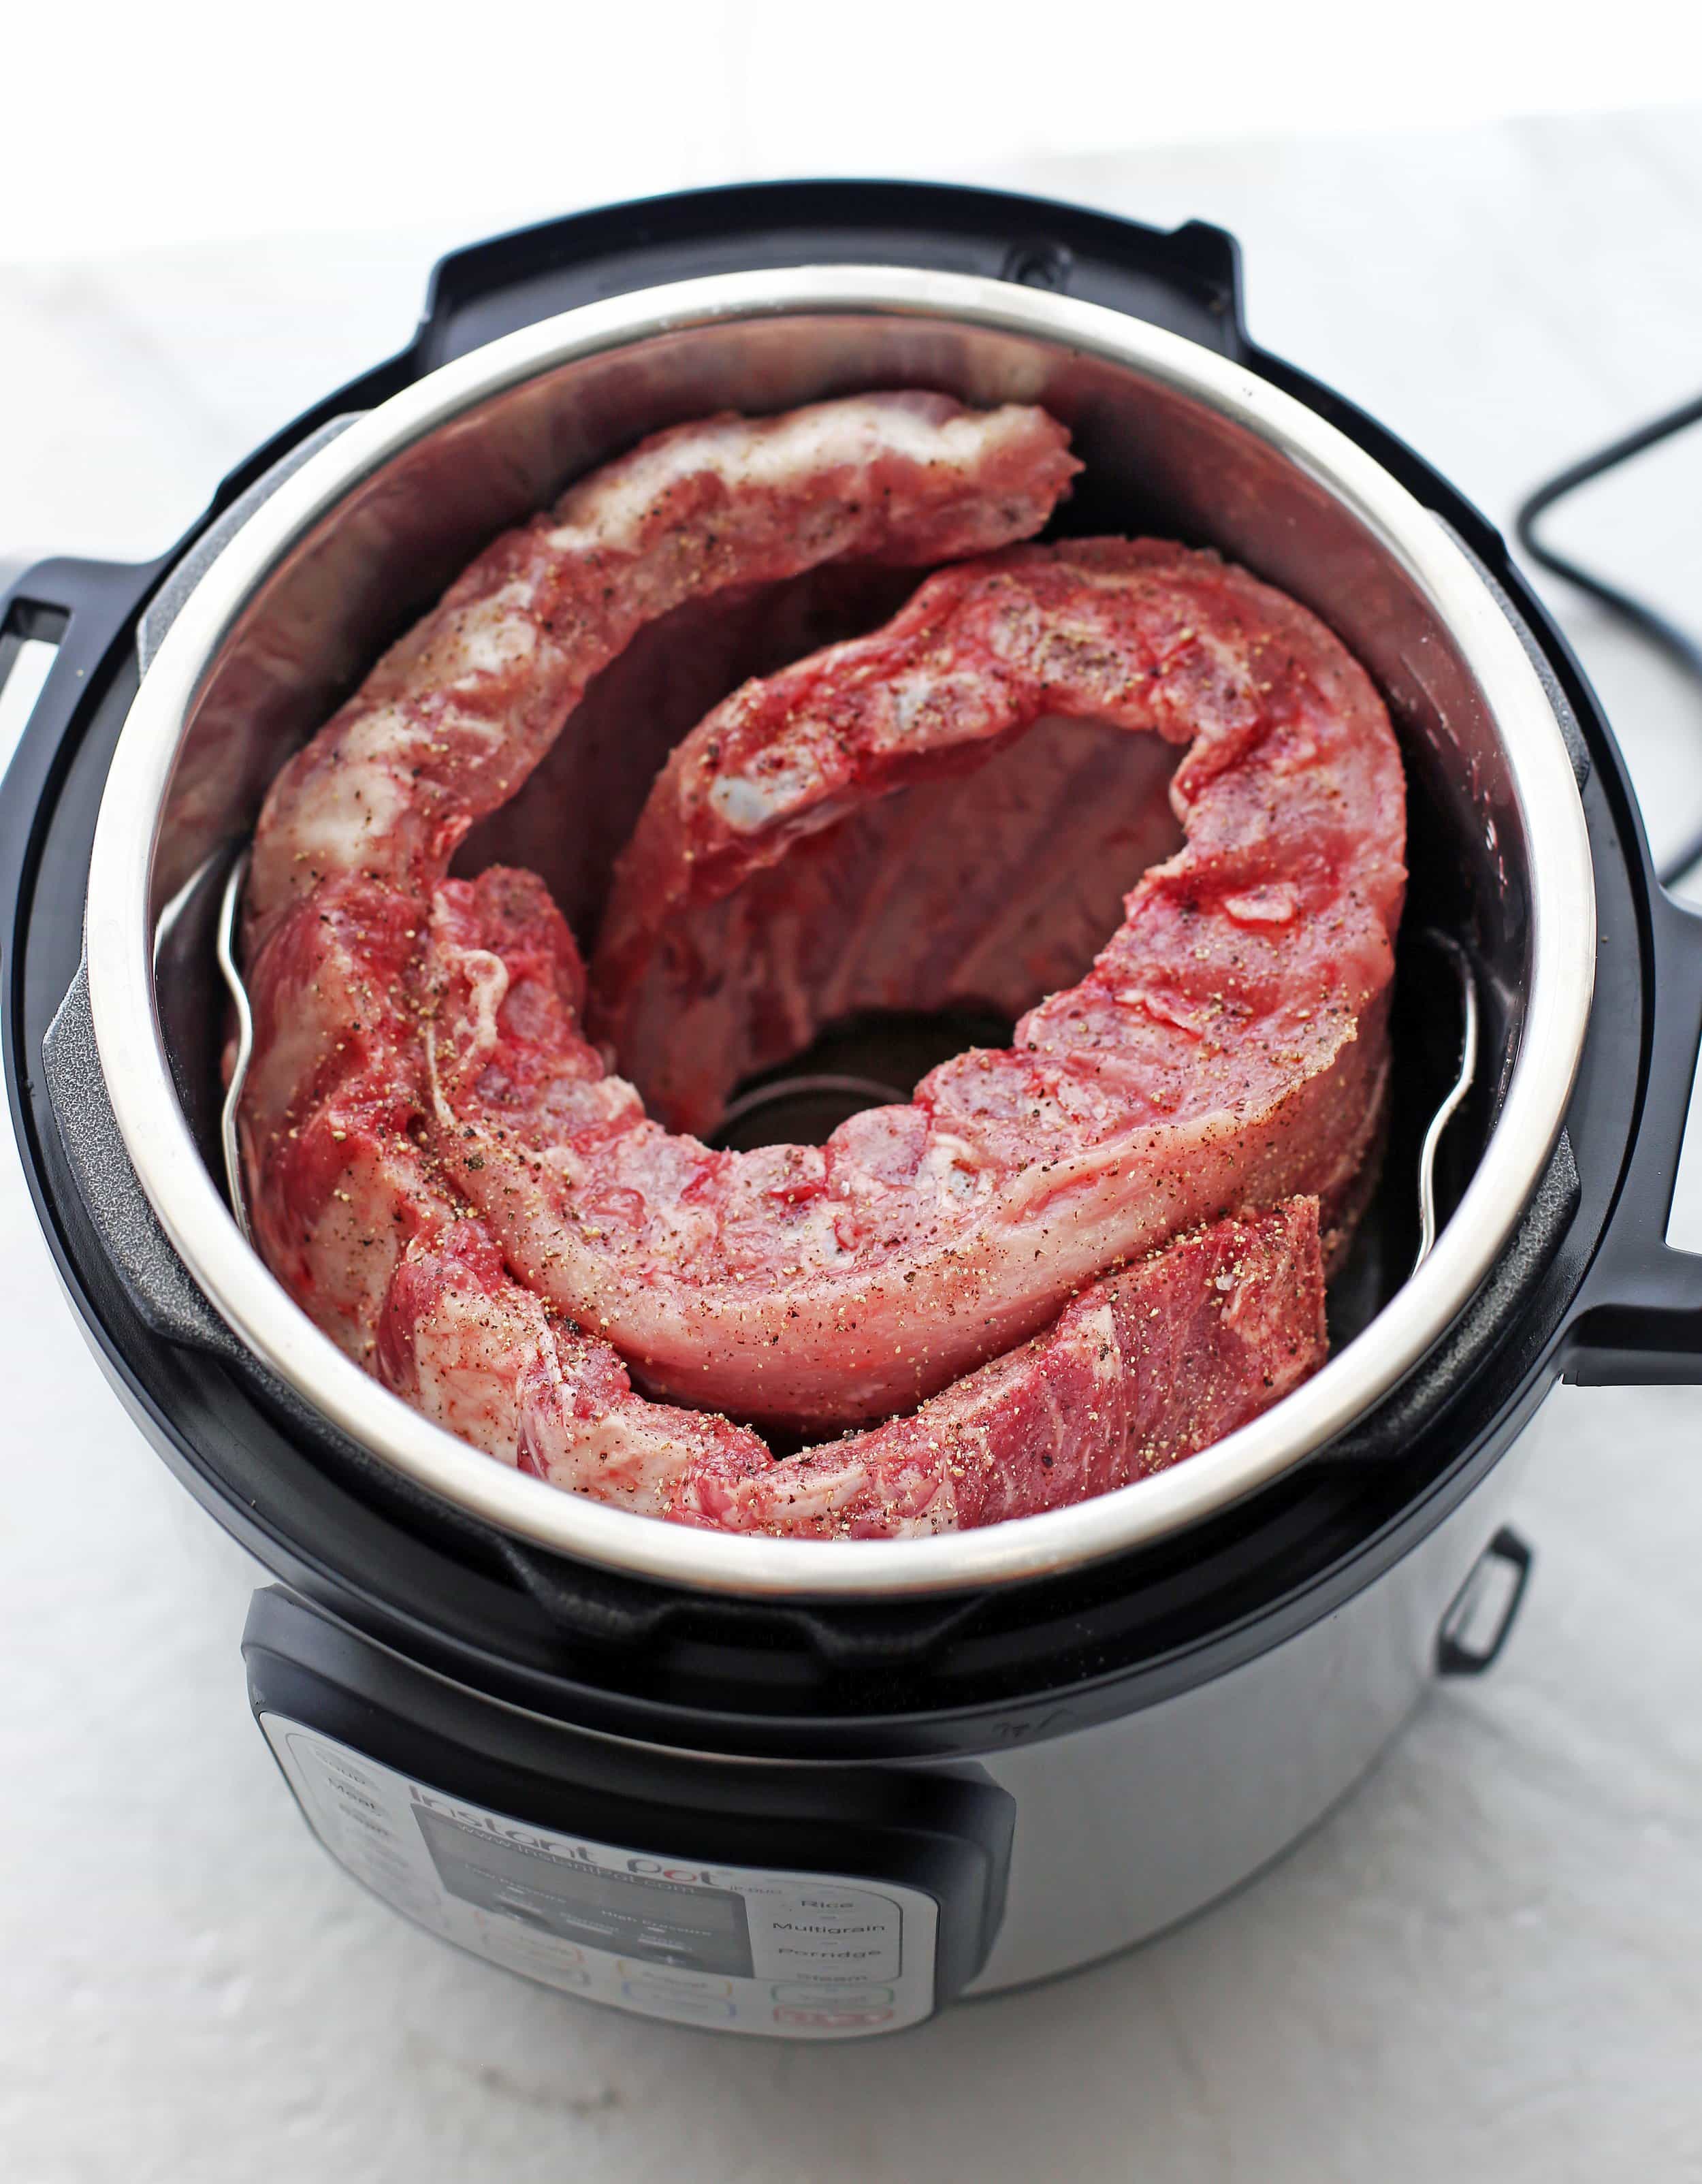 Two raw rack of pork ribs curled around the inside of an Instant Pot.